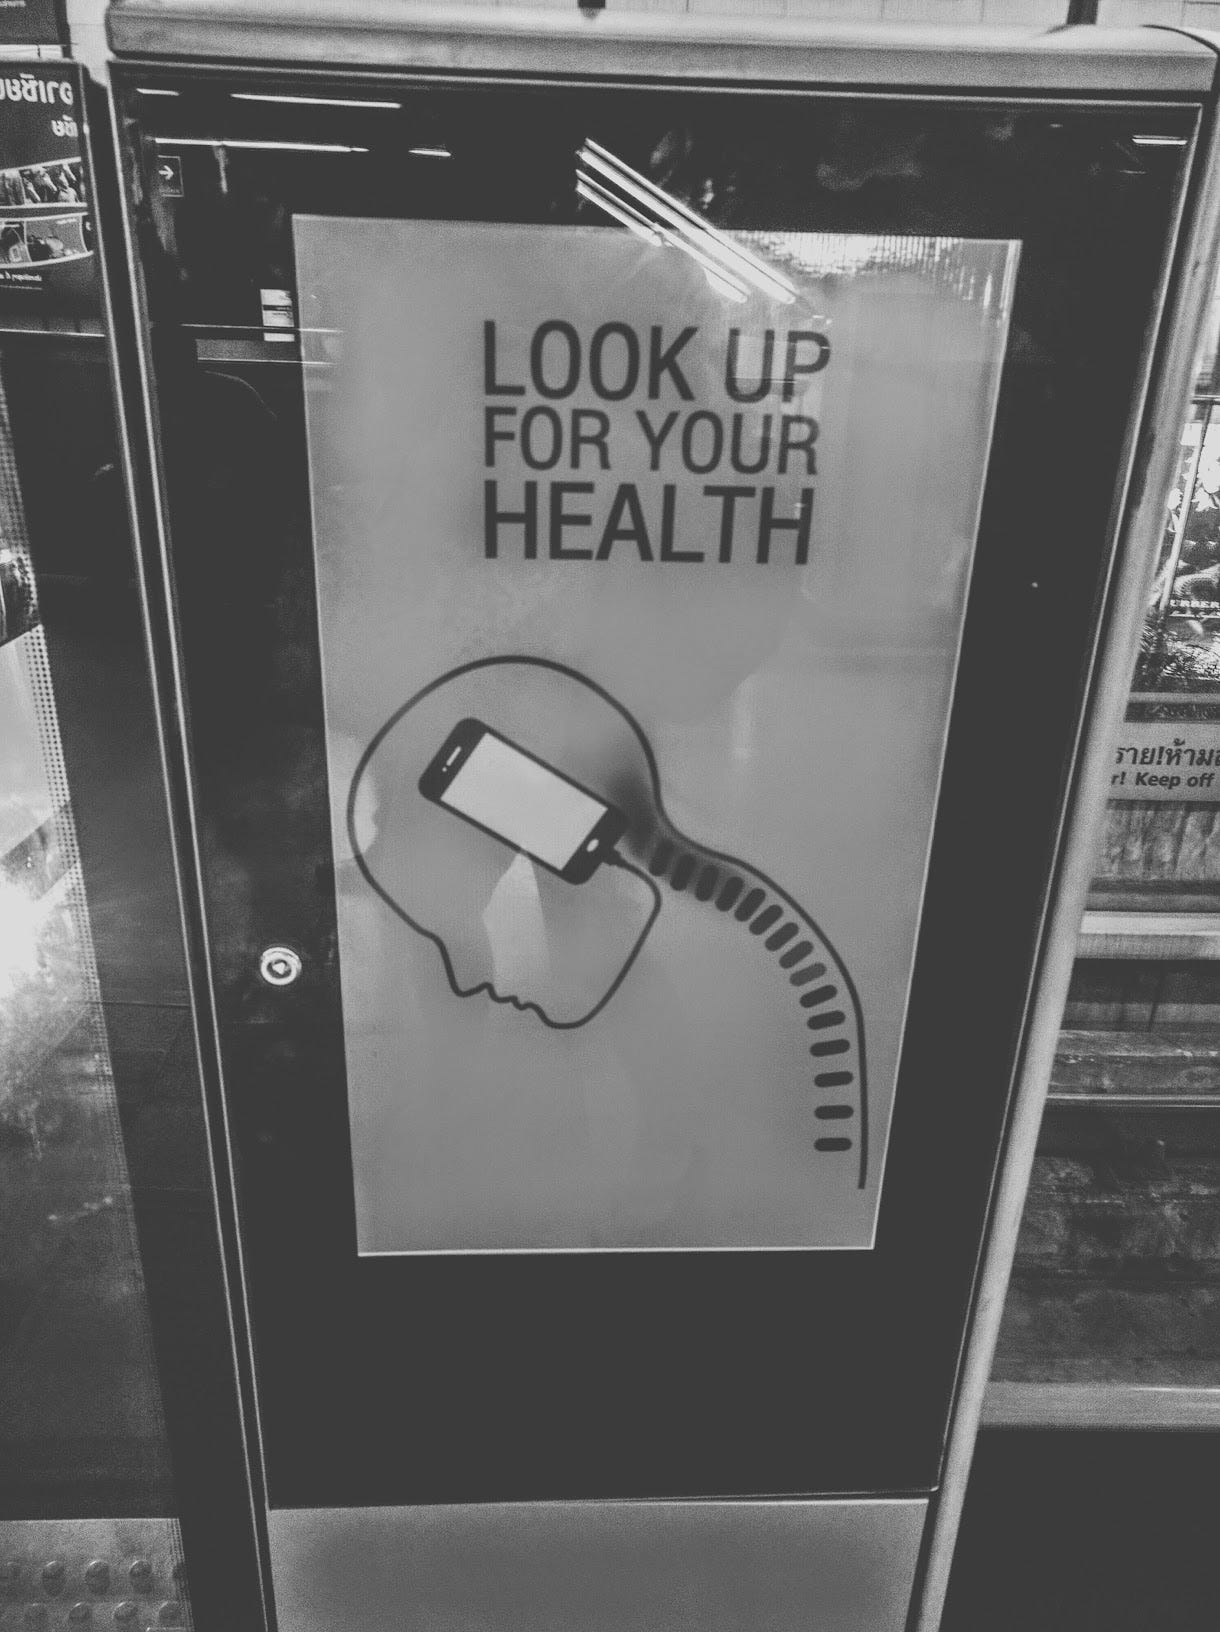 A poster at a subway station says "Look up for your health," and show an illustration of a skeleton curled over a phone that winds into the skull